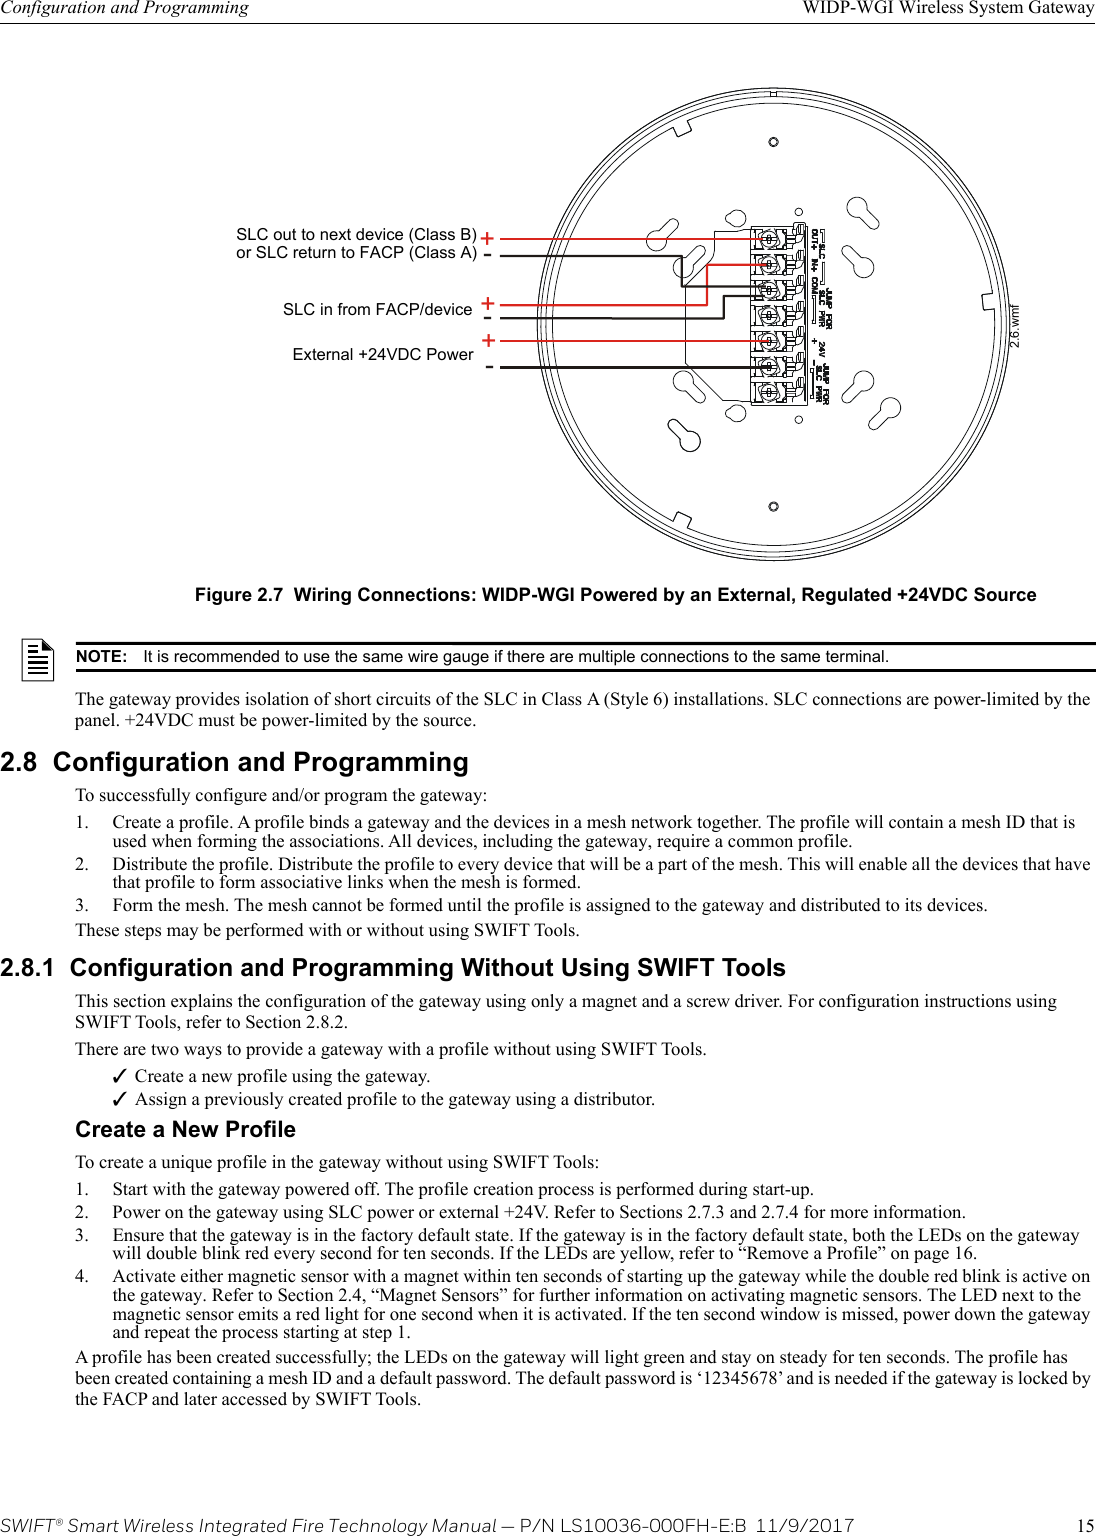 SWIFT® Smart Wireless Integrated Fire Technology Manual — P/N LS10036-000FH-E:B  11/9/2017 15Configuration and Programming WIDP-WGI Wireless System GatewayThe gateway provides isolation of short circuits of the SLC in Class A (Style 6) installations. SLC connections are power-limited by the panel. +24VDC must be power-limited by the source.2.8  Configuration and ProgrammingTo successfully configure and/or program the gateway:1. Create a profile. A profile binds a gateway and the devices in a mesh network together. The profile will contain a mesh ID that is used when forming the associations. All devices, including the gateway, require a common profile.2. Distribute the profile. Distribute the profile to every device that will be a part of the mesh. This will enable all the devices that have that profile to form associative links when the mesh is formed.3. Form the mesh. The mesh cannot be formed until the profile is assigned to the gateway and distributed to its devices. These steps may be performed with or without using SWIFT Tools.2.8.1  Configuration and Programming Without Using SWIFT ToolsThis section explains the configuration of the gateway using only a magnet and a screw driver. For configuration instructions using SWIFT Tools, refer to Section 2.8.2. There are two ways to provide a gateway with a profile without using SWIFT Tools.Create a new profile using the gateway.Assign a previously created profile to the gateway using a distributor.Create a New ProfileTo create a unique profile in the gateway without using SWIFT Tools: 1. Start with the gateway powered off. The profile creation process is performed during start-up. 2. Power on the gateway using SLC power or external +24V. Refer to Sections 2.7.3 and 2.7.4 for more information.3. Ensure that the gateway is in the factory default state. If the gateway is in the factory default state, both the LEDs on the gateway will double blink red every second for ten seconds. If the LEDs are yellow, refer to “Remove a Profile” on page 16.4. Activate either magnetic sensor with a magnet within ten seconds of starting up the gateway while the double red blink is active on the gateway. Refer to Section 2.4, “Magnet Sensors” for further information on activating magnetic sensors. The LED next to the magnetic sensor emits a red light for one second when it is activated. If the ten second window is missed, power down the gateway and repeat the process starting at step 1.A profile has been created successfully; the LEDs on the gateway will light green and stay on steady for ten seconds. The profile has been created containing a mesh ID and a default password. The default password is ‘12345678’ and is needed if the gateway is locked by the FACP and later accessed by SWIFT Tools.++--+-Figure 2.7  Wiring Connections: WIDP-WGI Powered by an External, Regulated +24VDC SourceSLC in from FACP/deviceExternal +24VDC PowerSLC out to next device (Class B)or SLC return to FACP (Class A)2.6.wmfNOTE: It is recommended to use the same wire gauge if there are multiple connections to the same terminal.